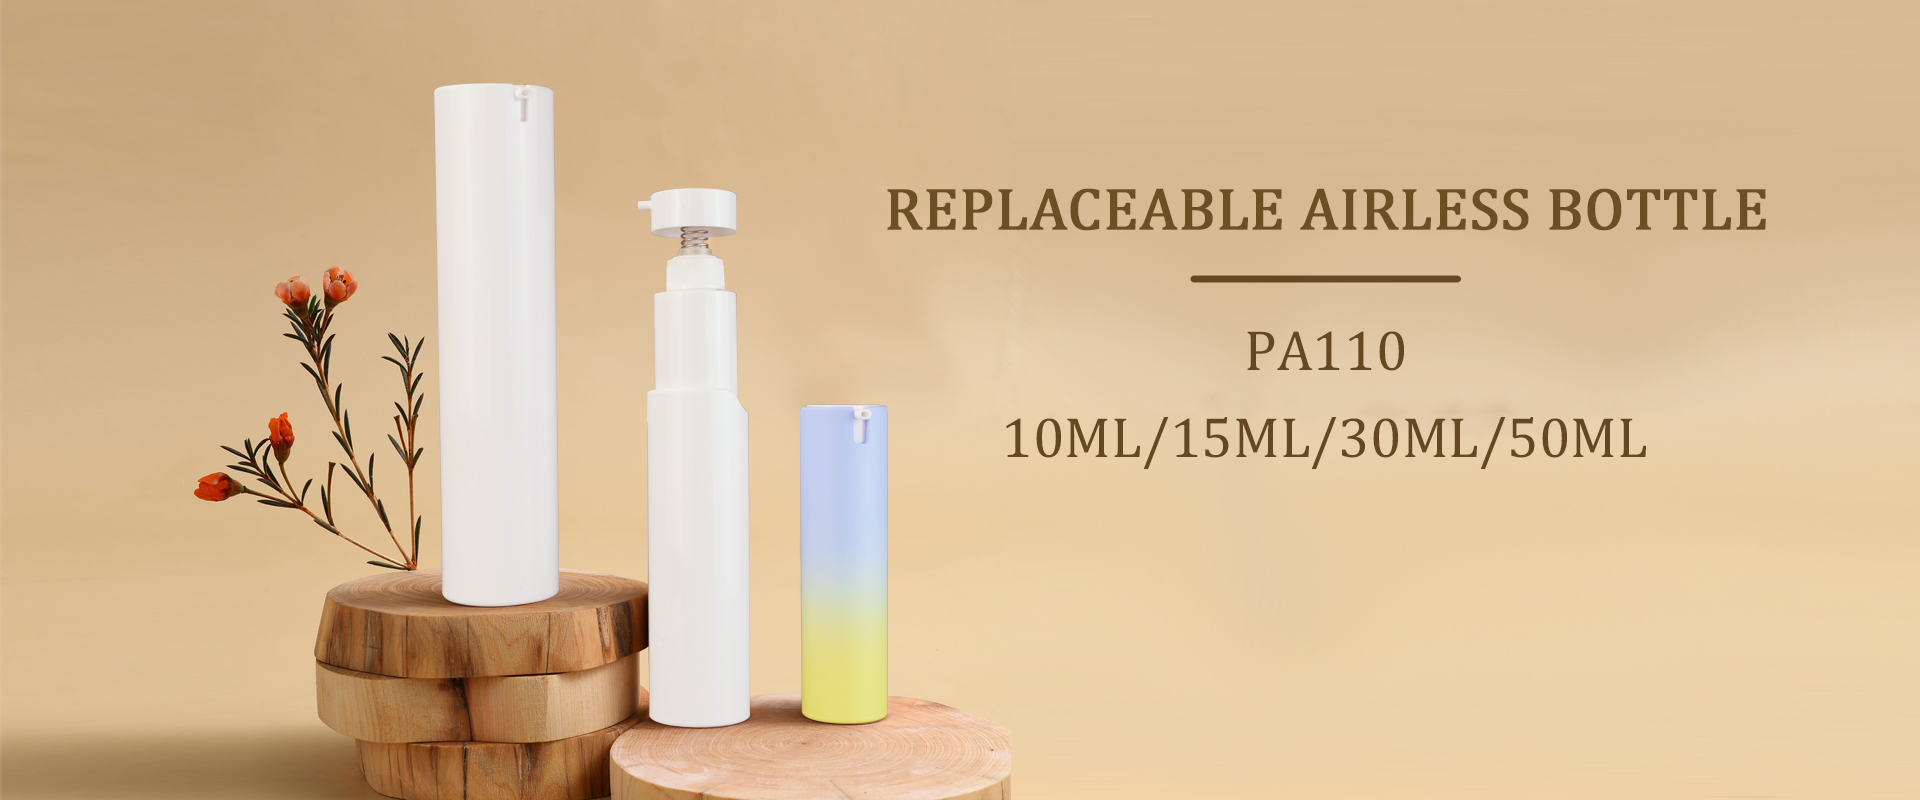 Replaceable airless bottle Banner